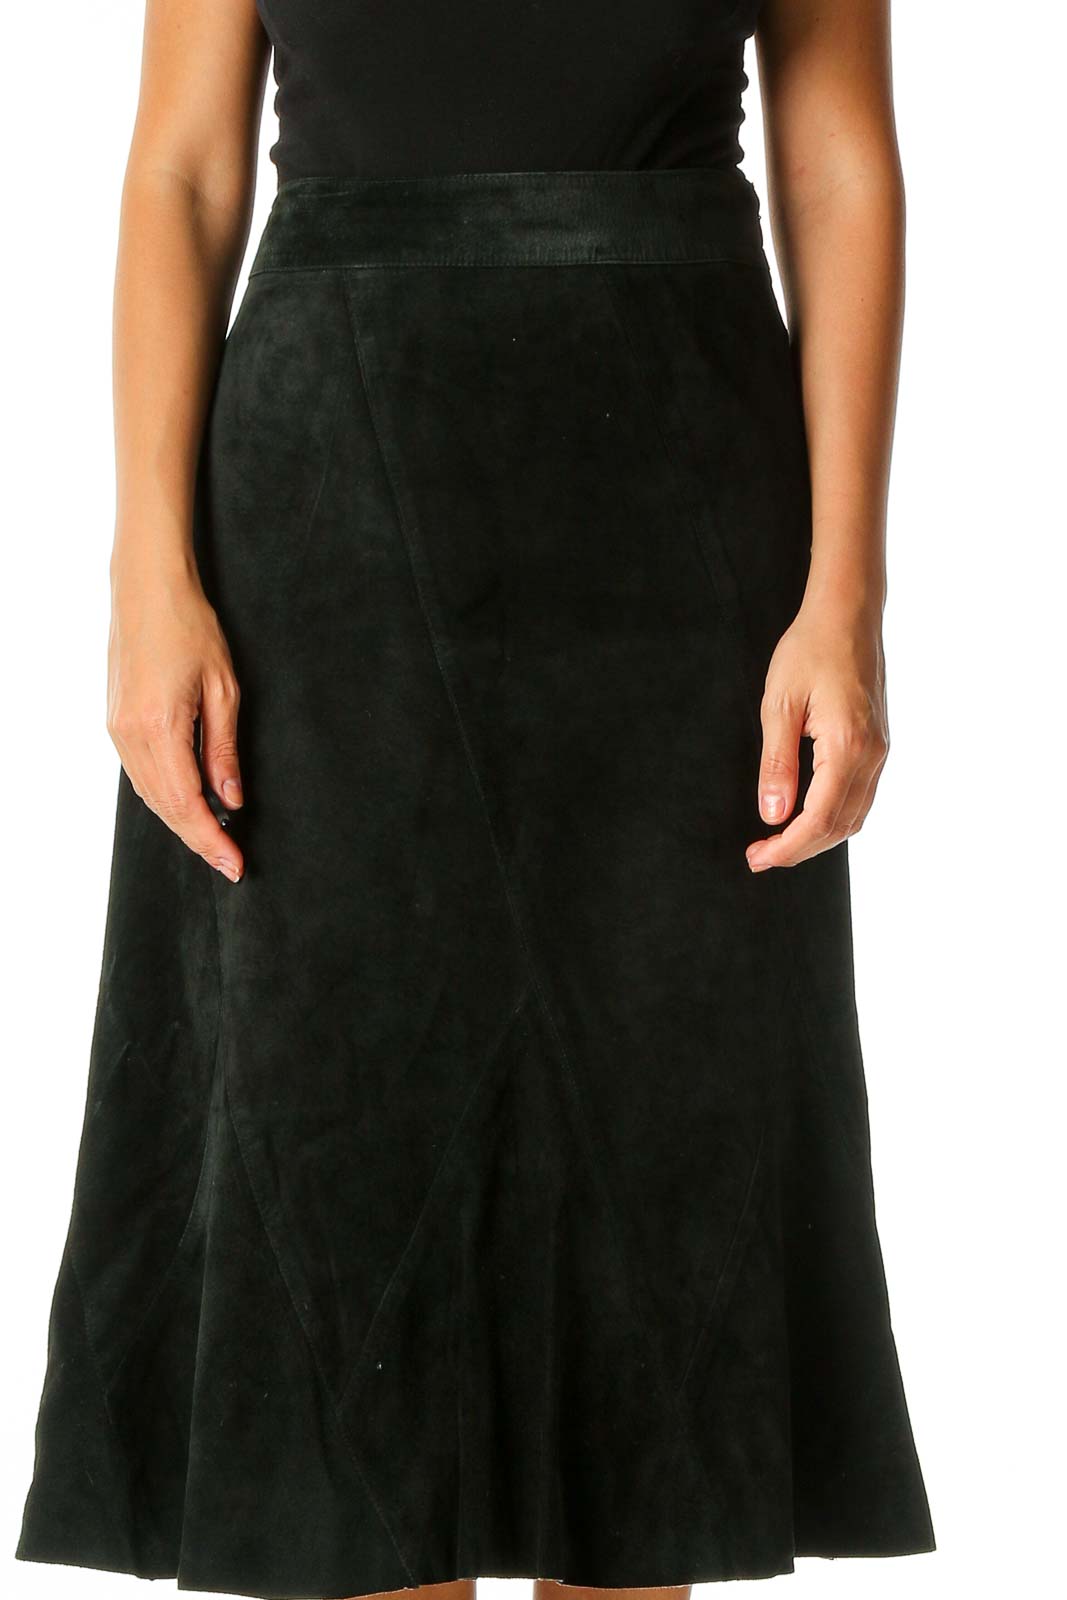 Black Solid Retro A-Line Skirt Front